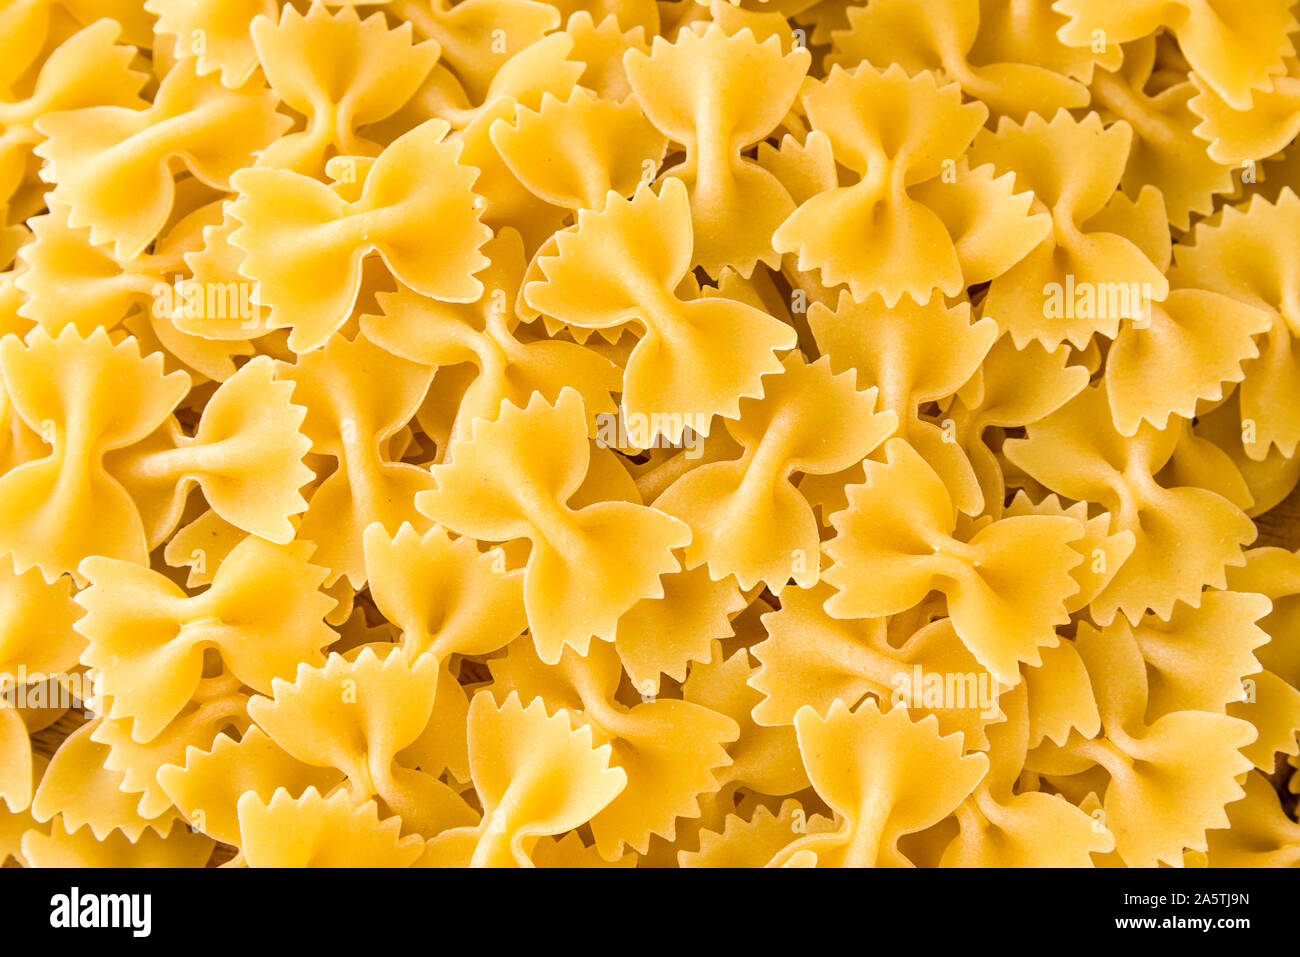 Download Some Farfalle Pasta Forming A Background Pattern Pasta Bows Stock Photo Alamy Yellowimages Mockups